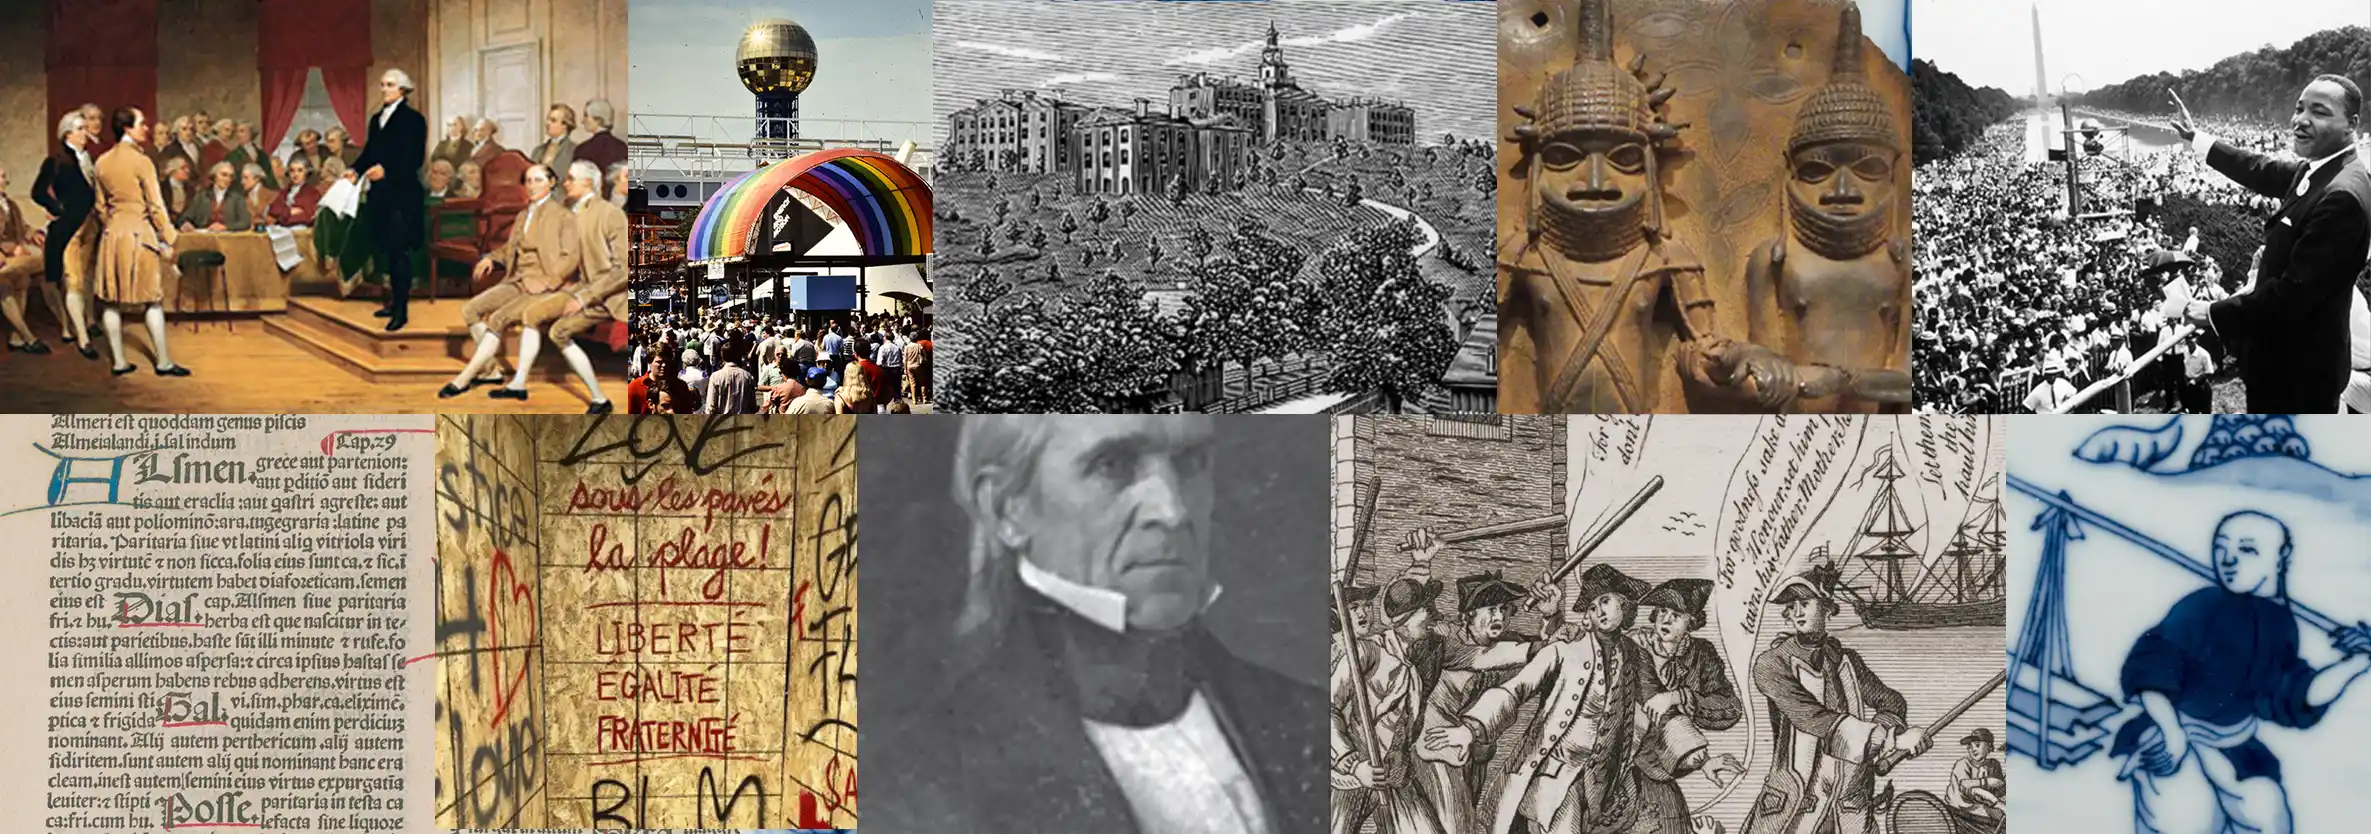 Department of History homepage collage showing art and photos from across the centuries, going from Martin Luther King, Jr. all the way back to Pre-Modern history.